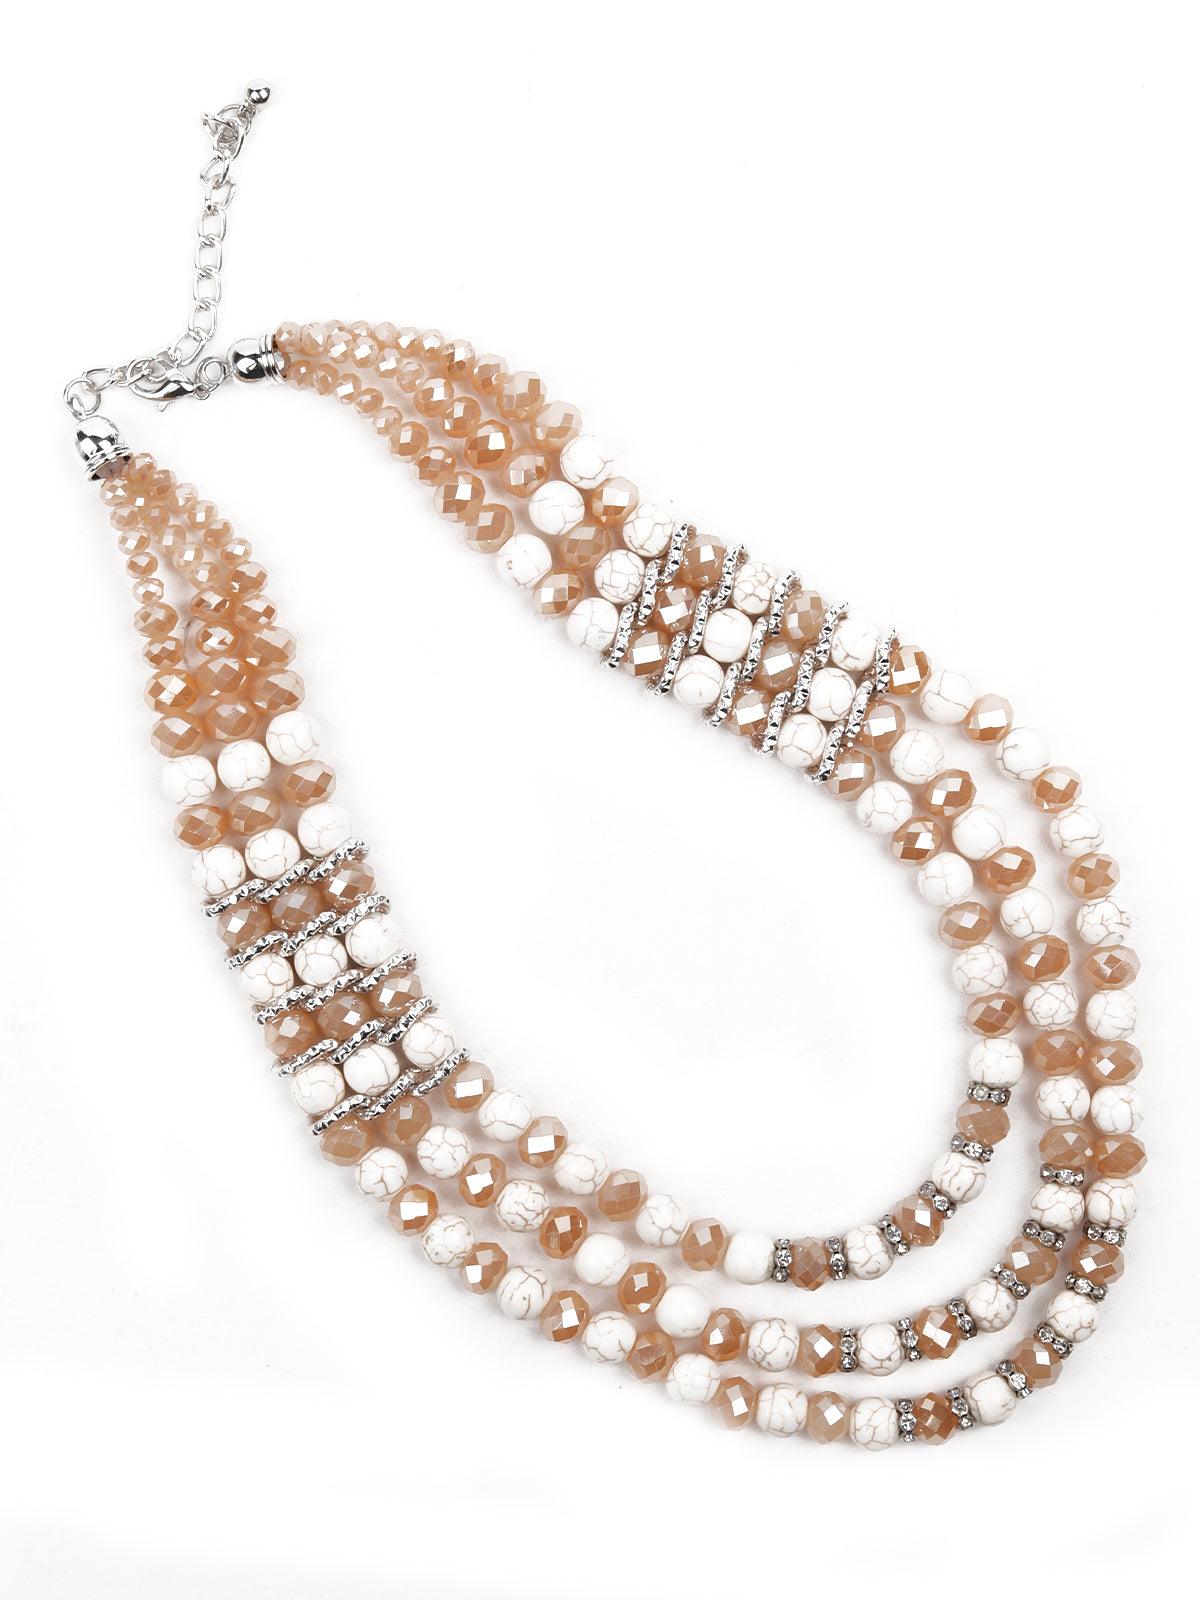 Women's Gorgeous Peach And White Layered Mala Style Necklace - Odette